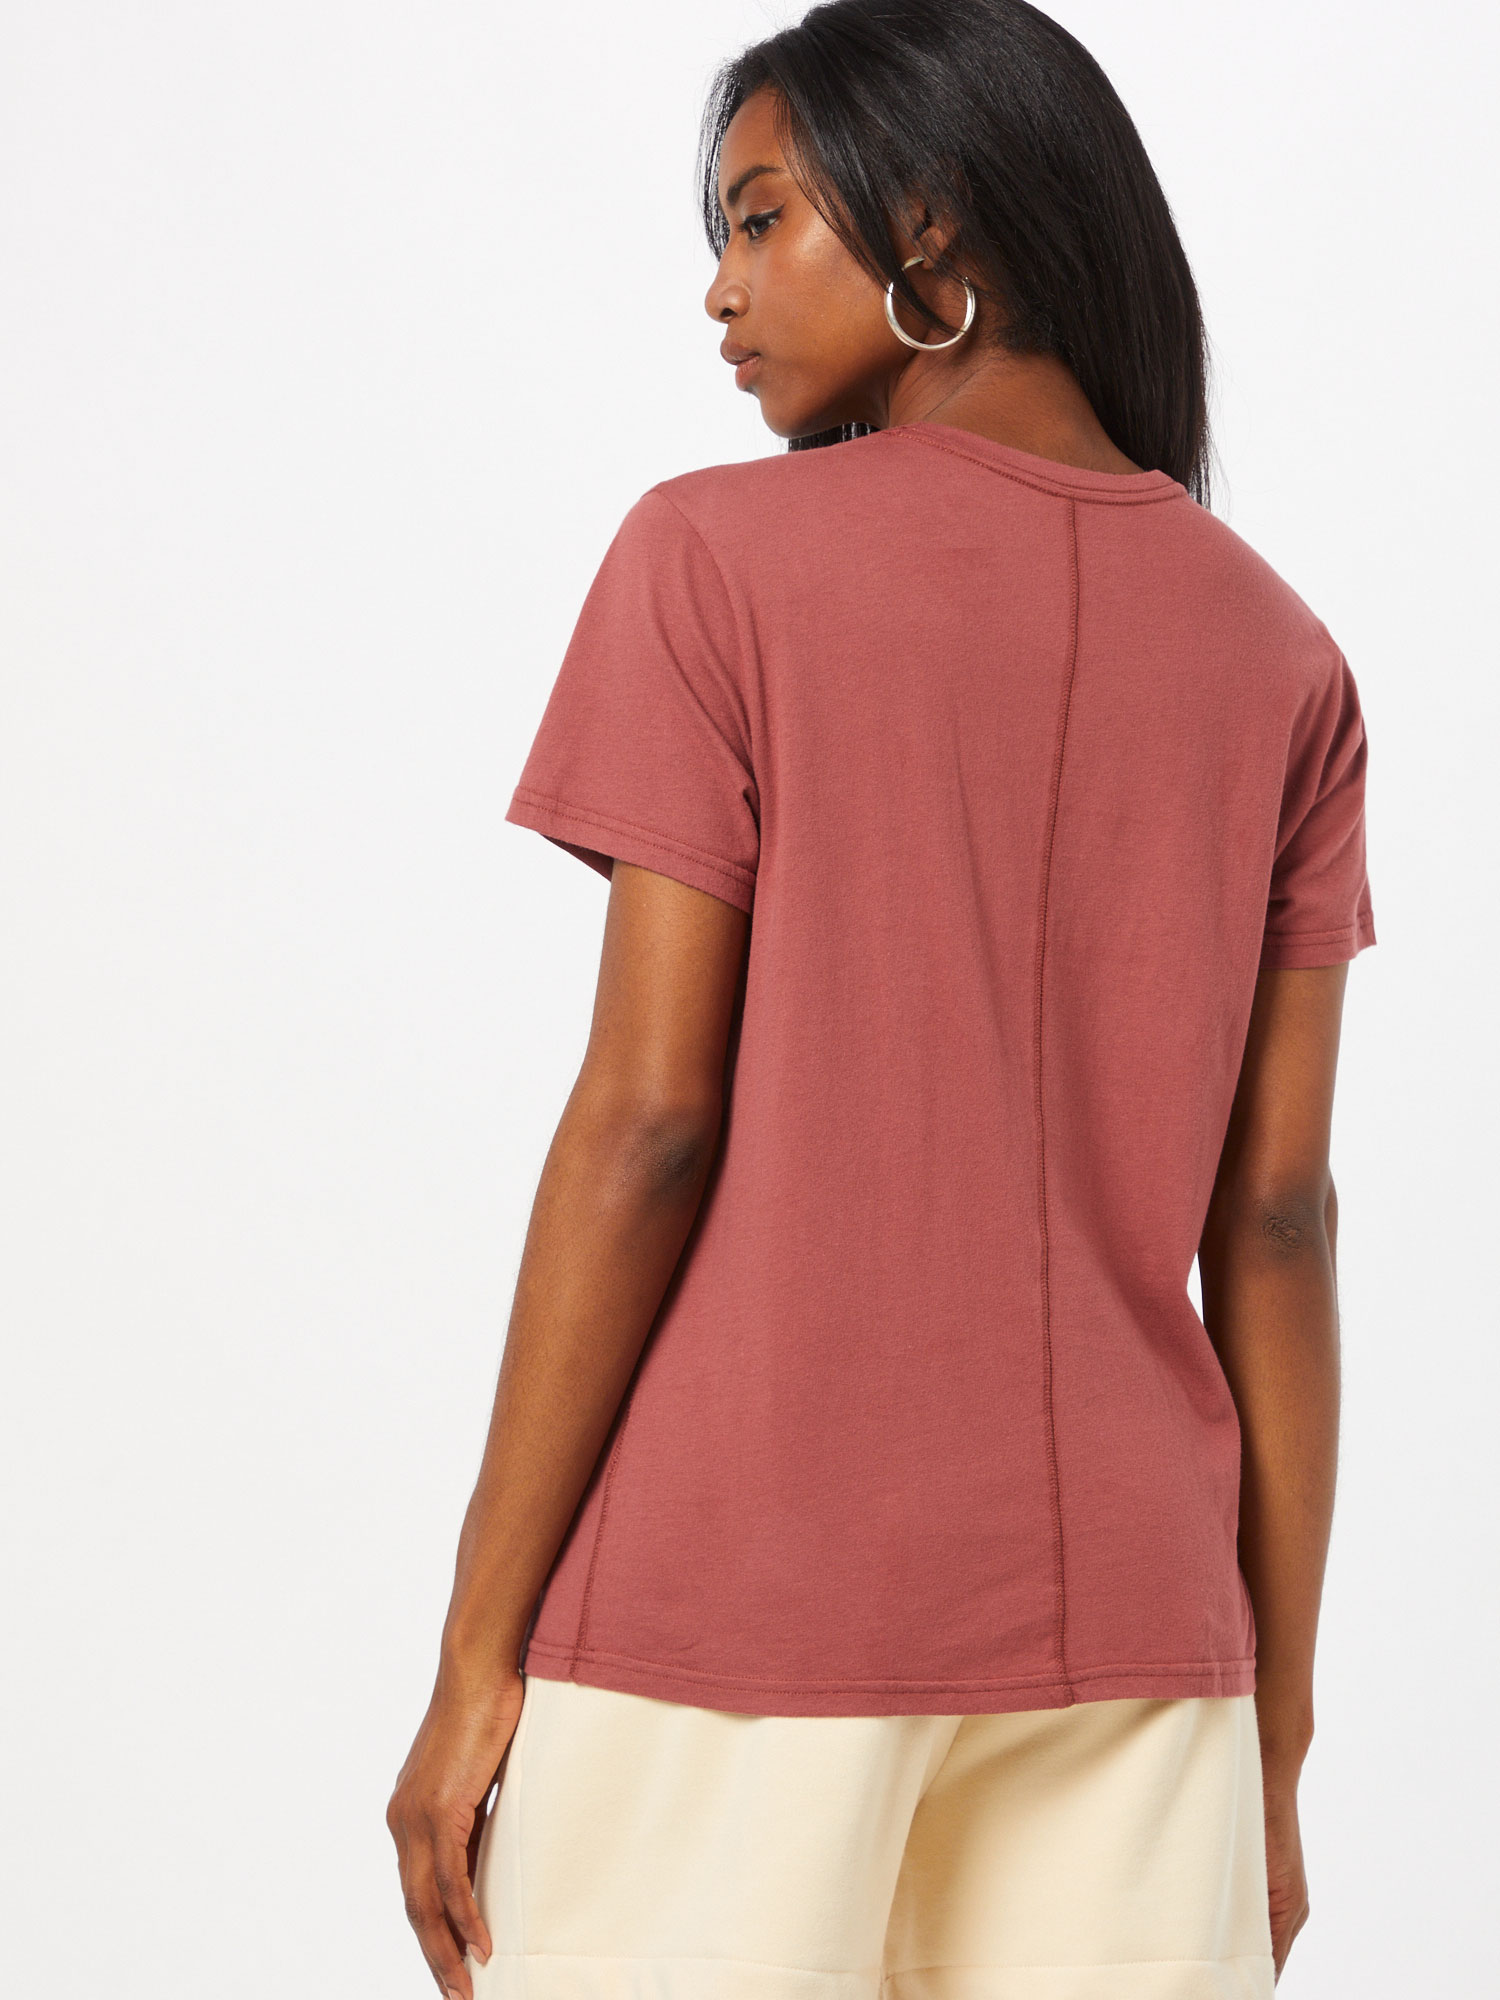 Abercrombie & Fitch T-Shirt in Rot, Rostrot 